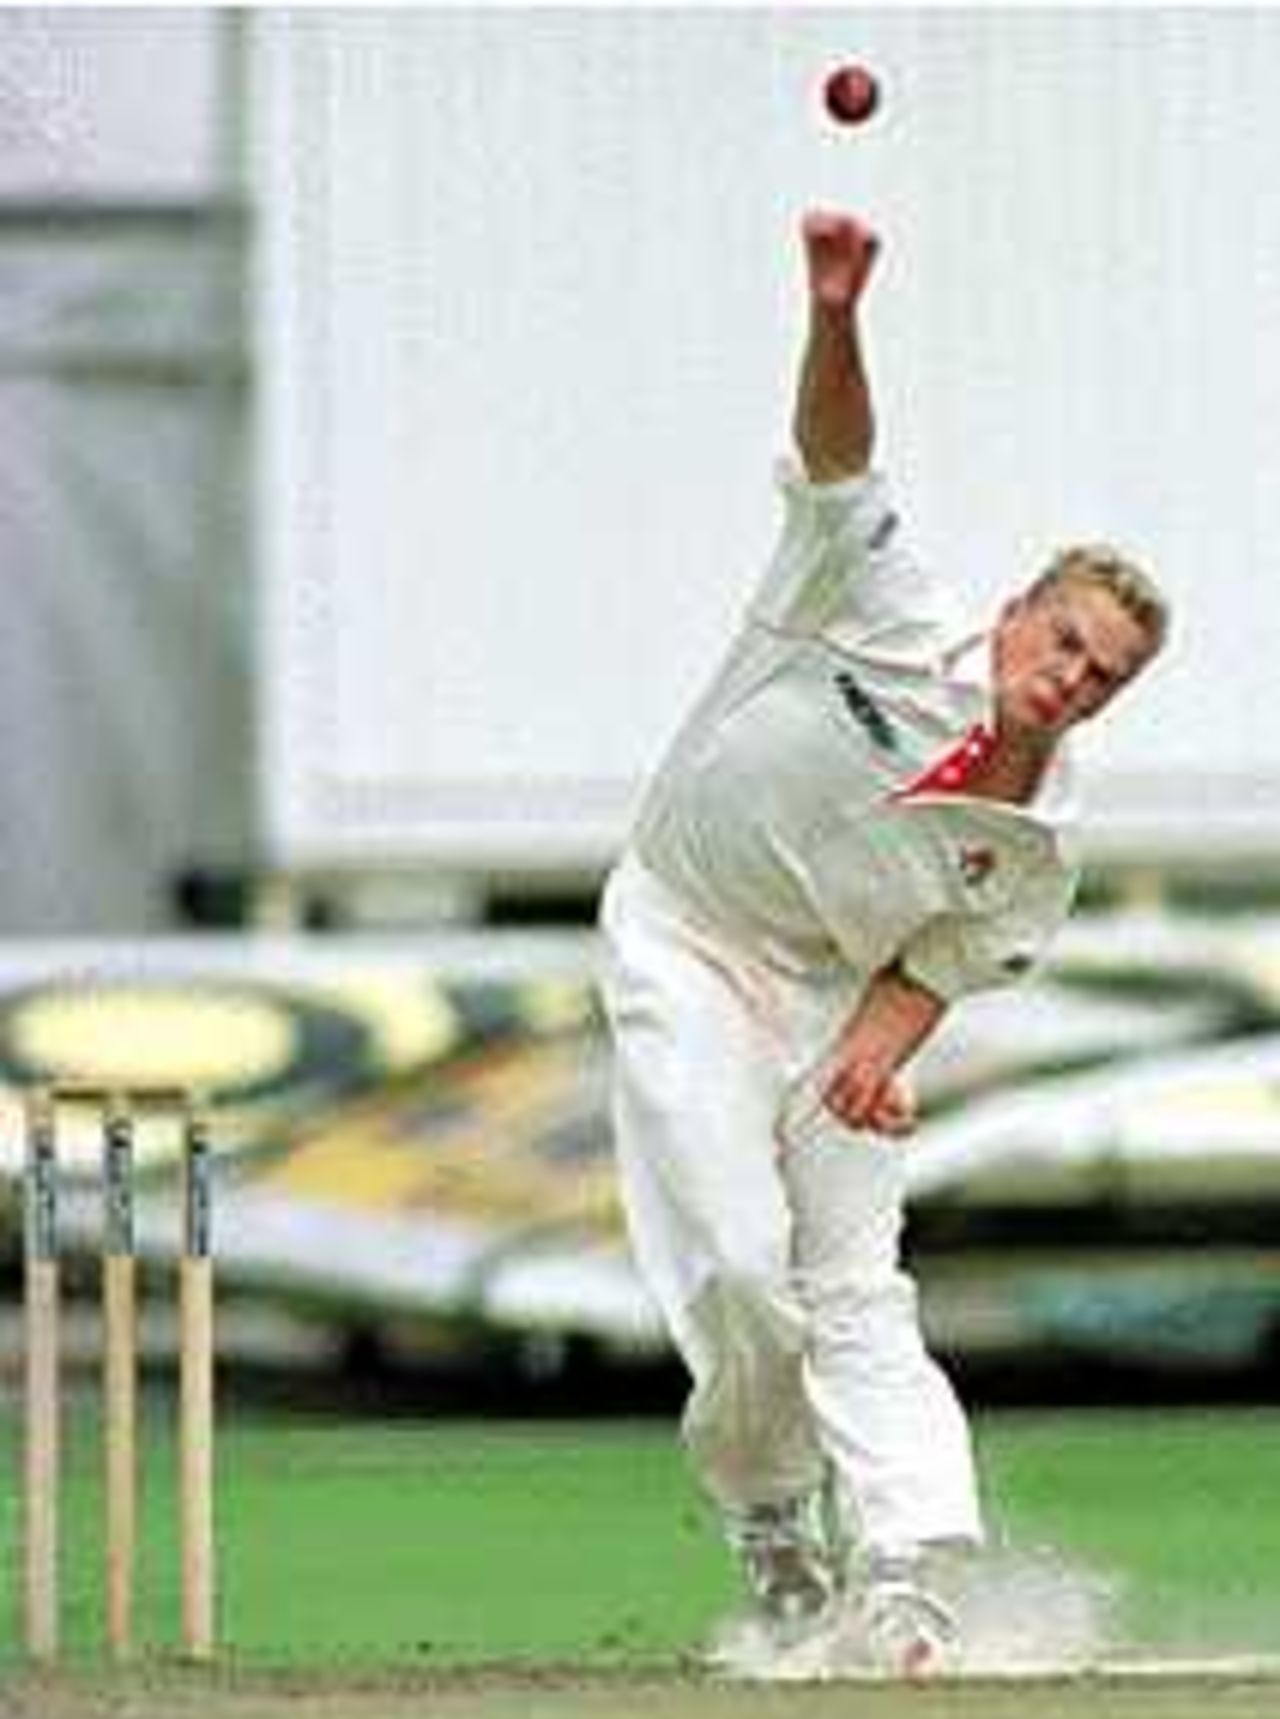 Richard Green in his delivery stride, Lancashire v Yorkshire, Day 1 of County Championship match, 19 Aug 1999